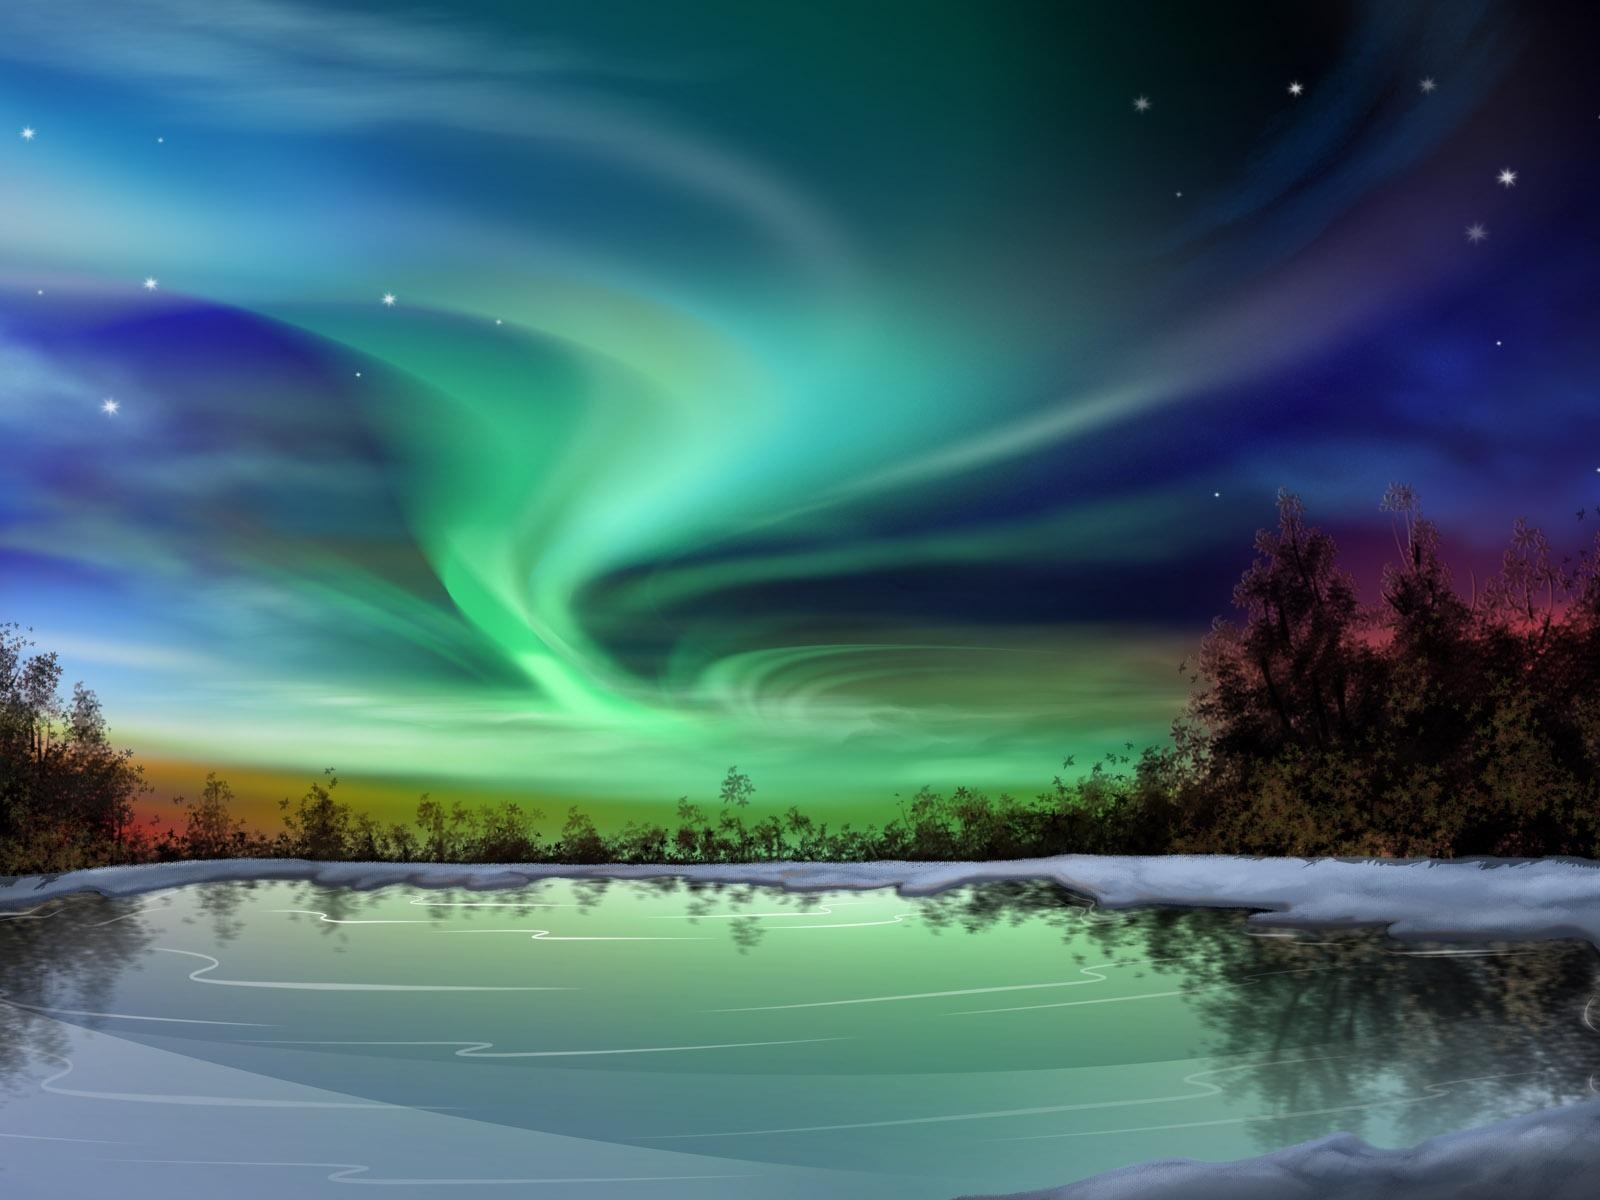 Natural wonders of the Northern Lights HD Wallpaper (2) #25 - 1600x1200